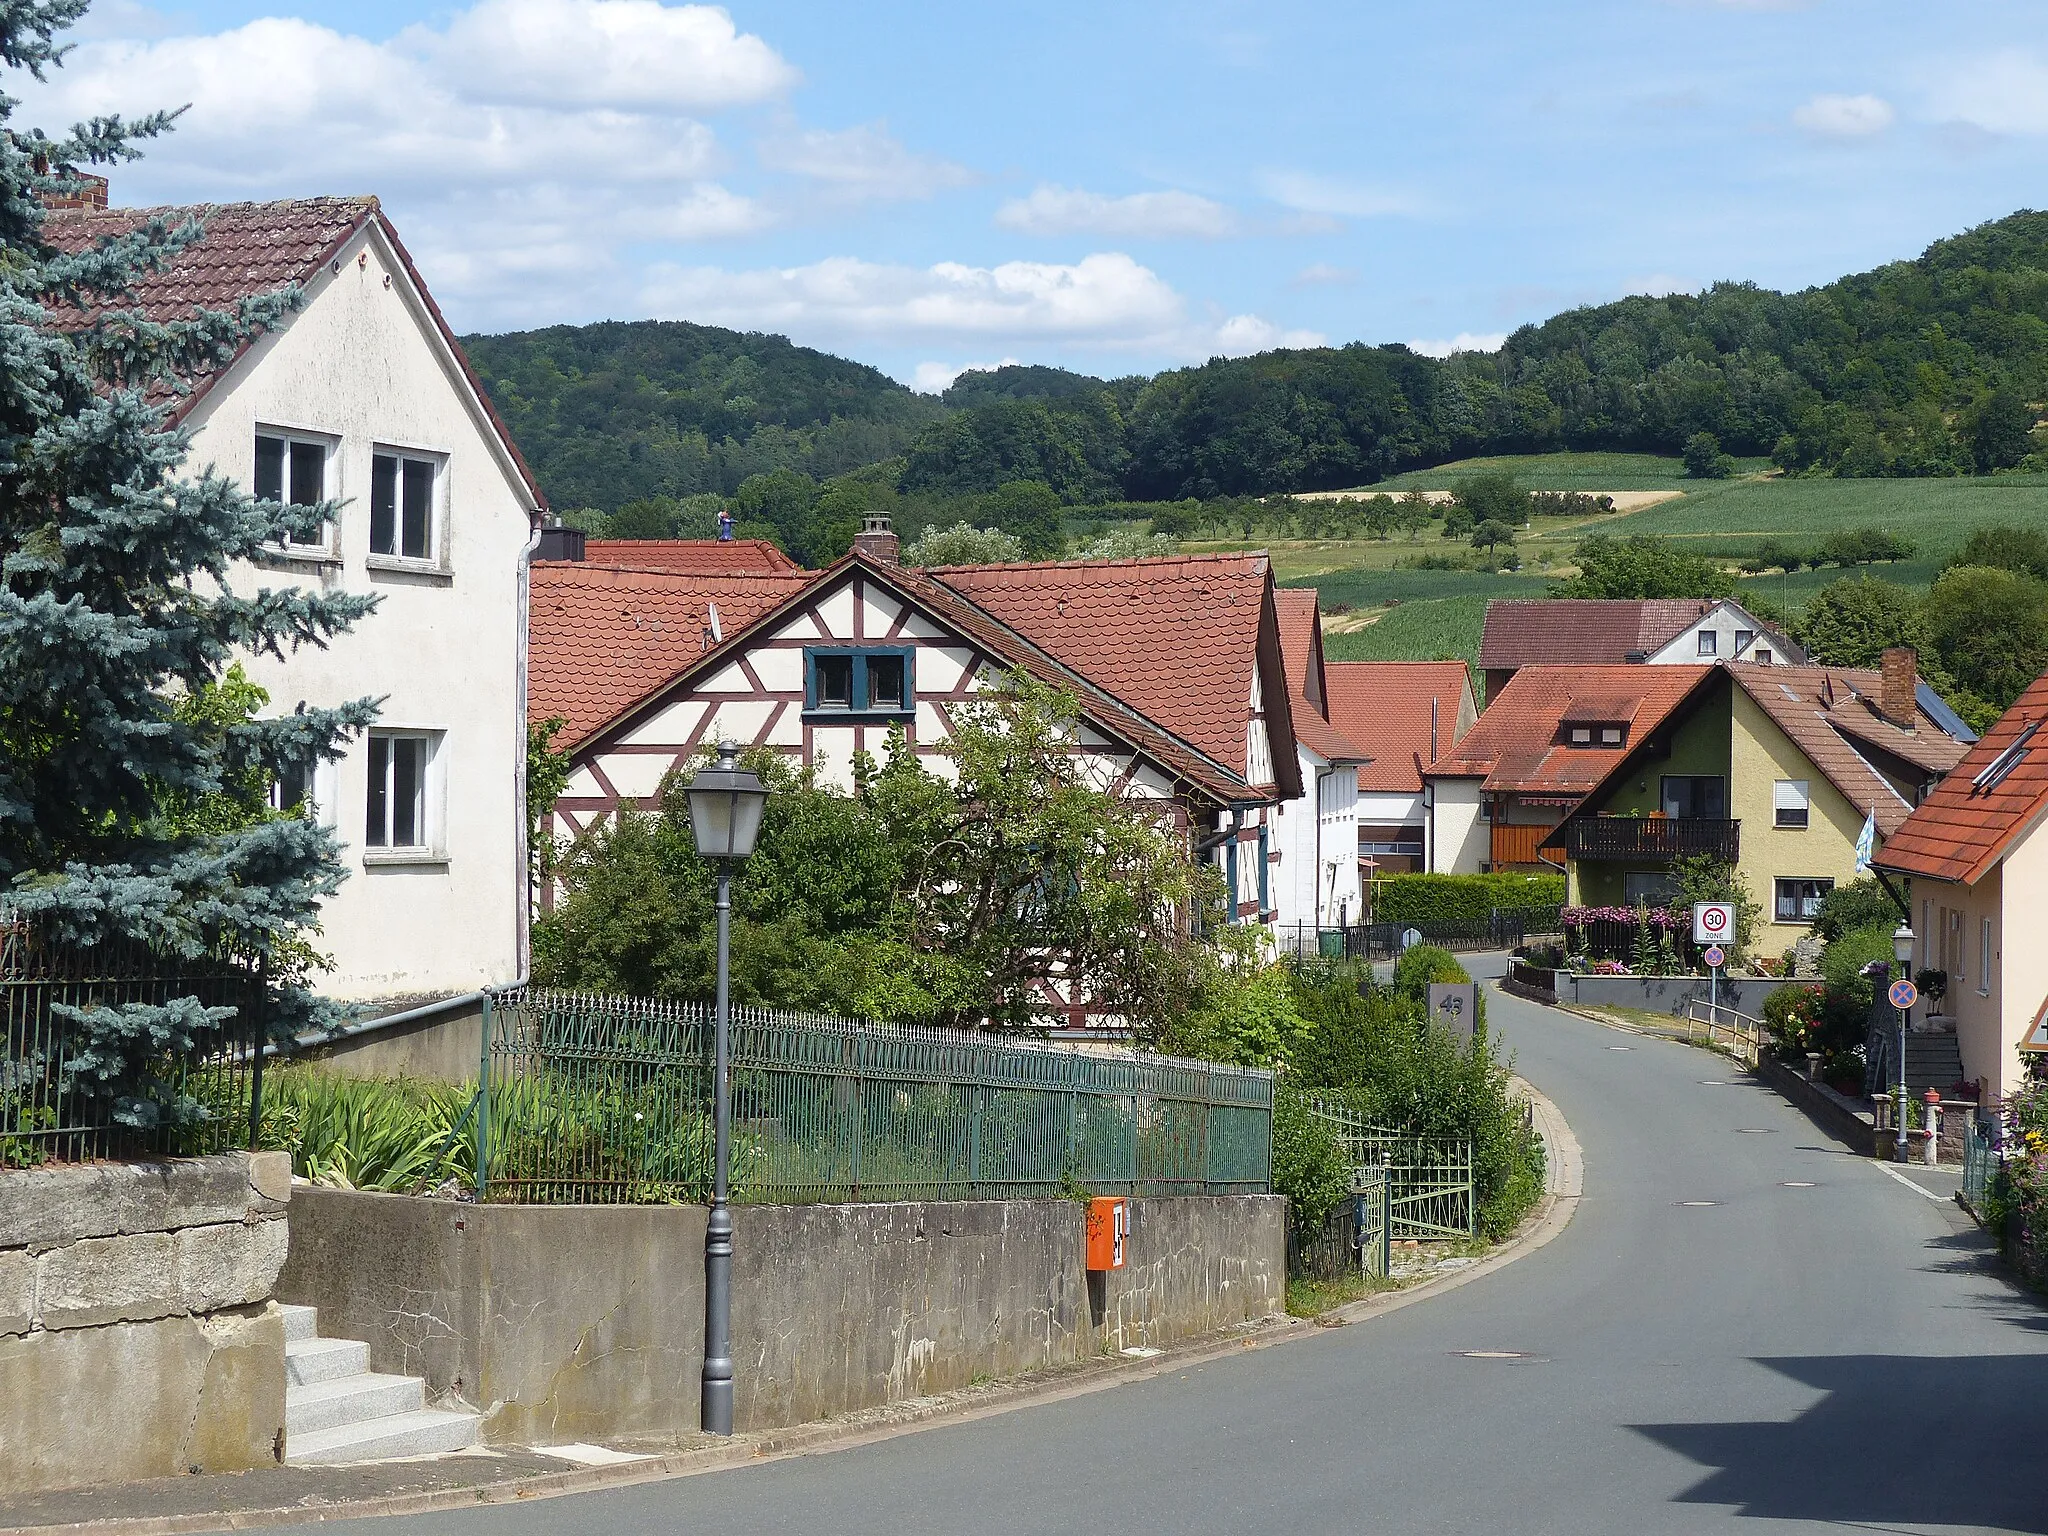 Photo showing: The village Dietzhof, a district of the municipality of Leutenbach